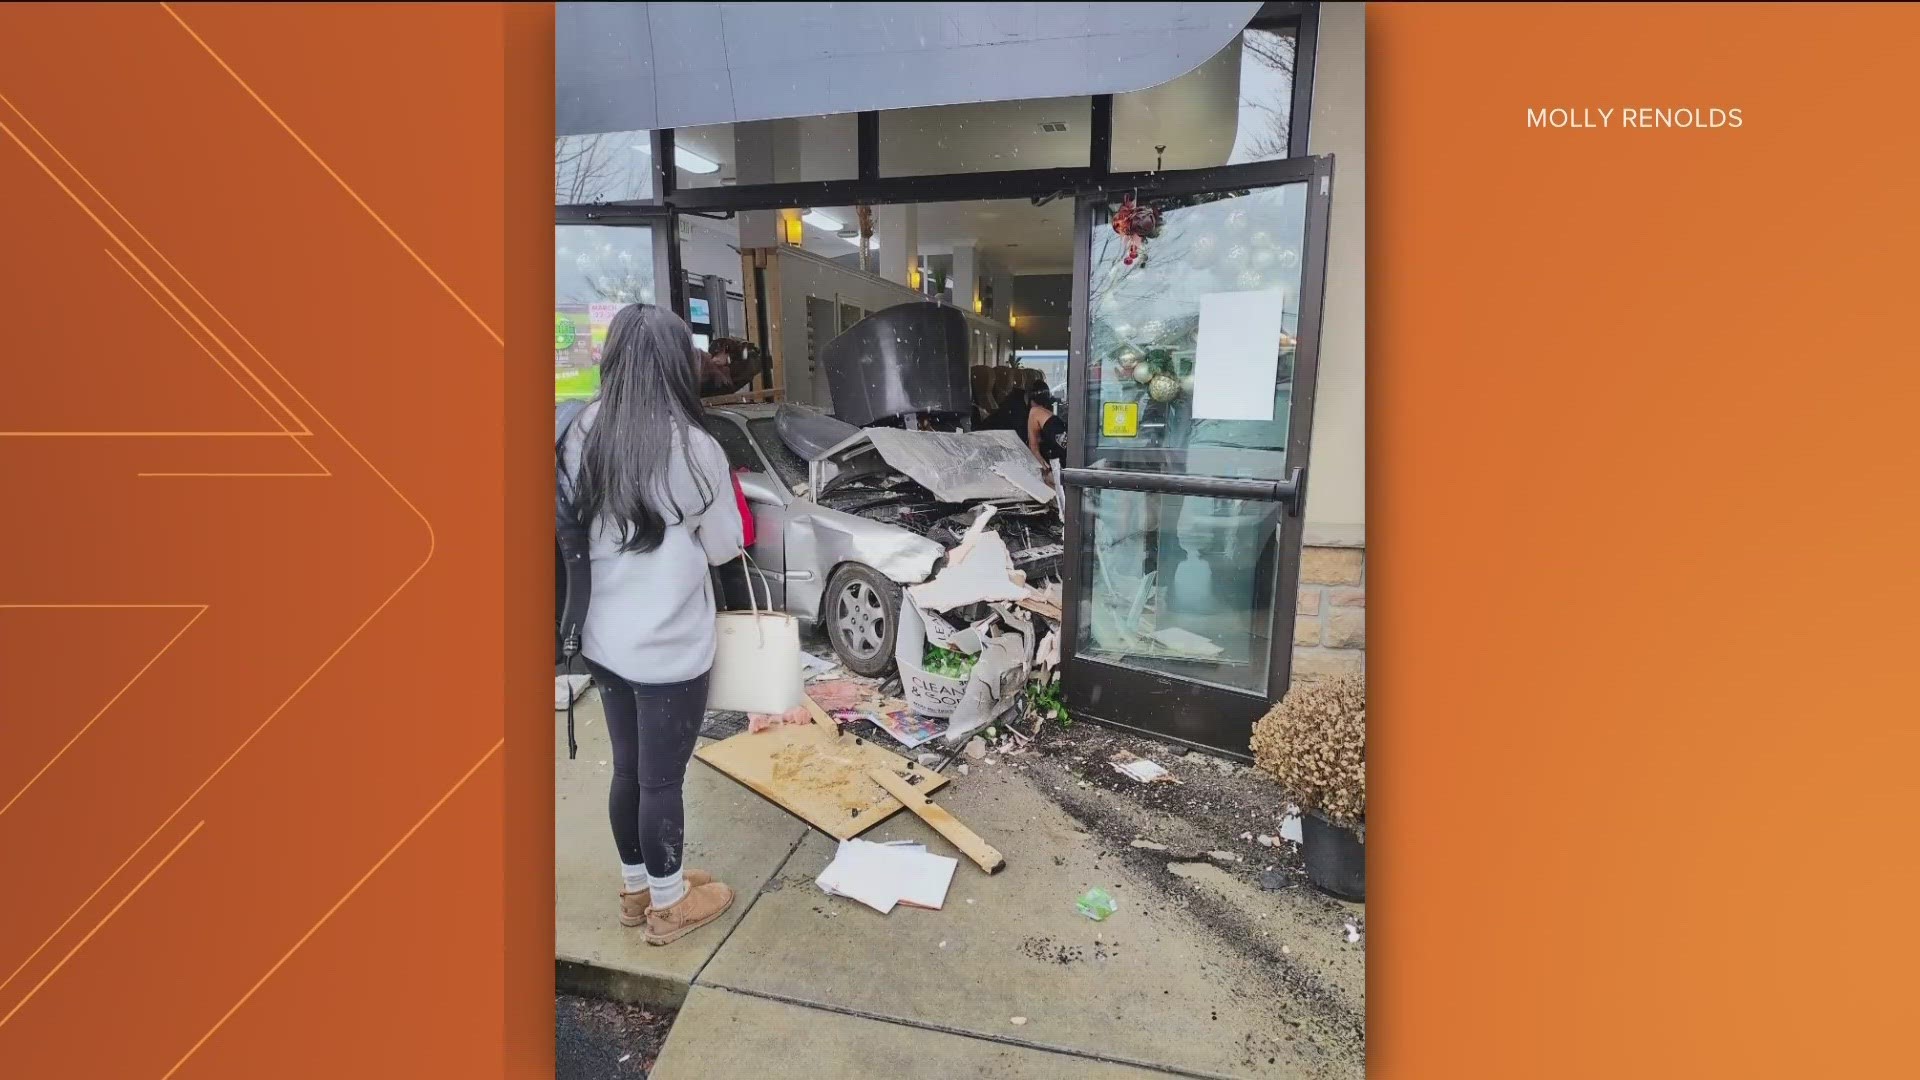 A Boise Police spokesperson said the vehicle crashed into the building on West Overland Road Friday morning. Two people inside the building have "minor injuries."